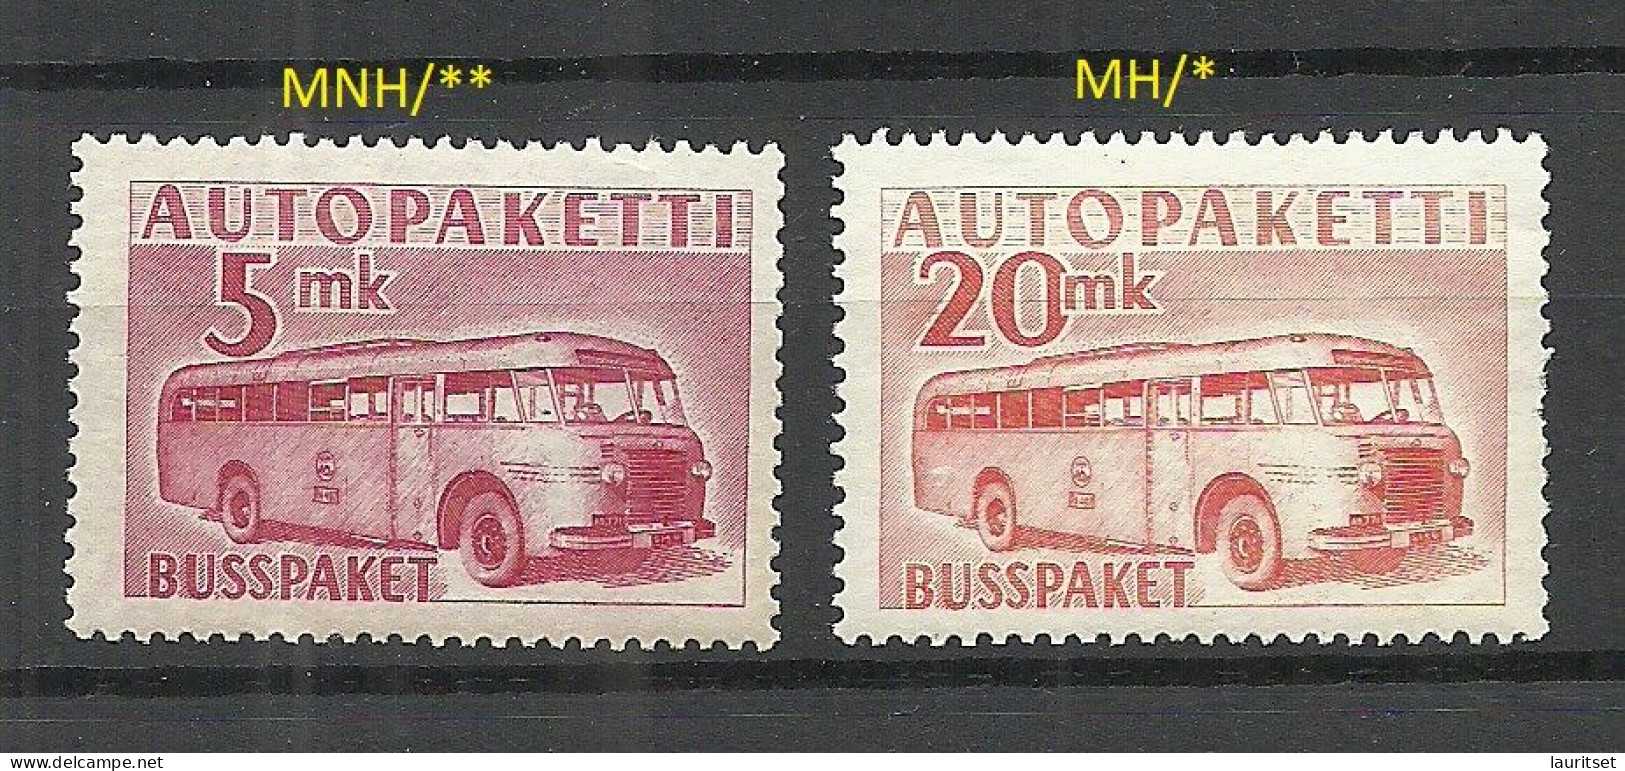 FINLAND FINNLAND 1955/1958 Auto-Paketmarken O Bus Omnibus Packet Stamps Michel 6 - 7 MNH/MH - Paquetes Postales